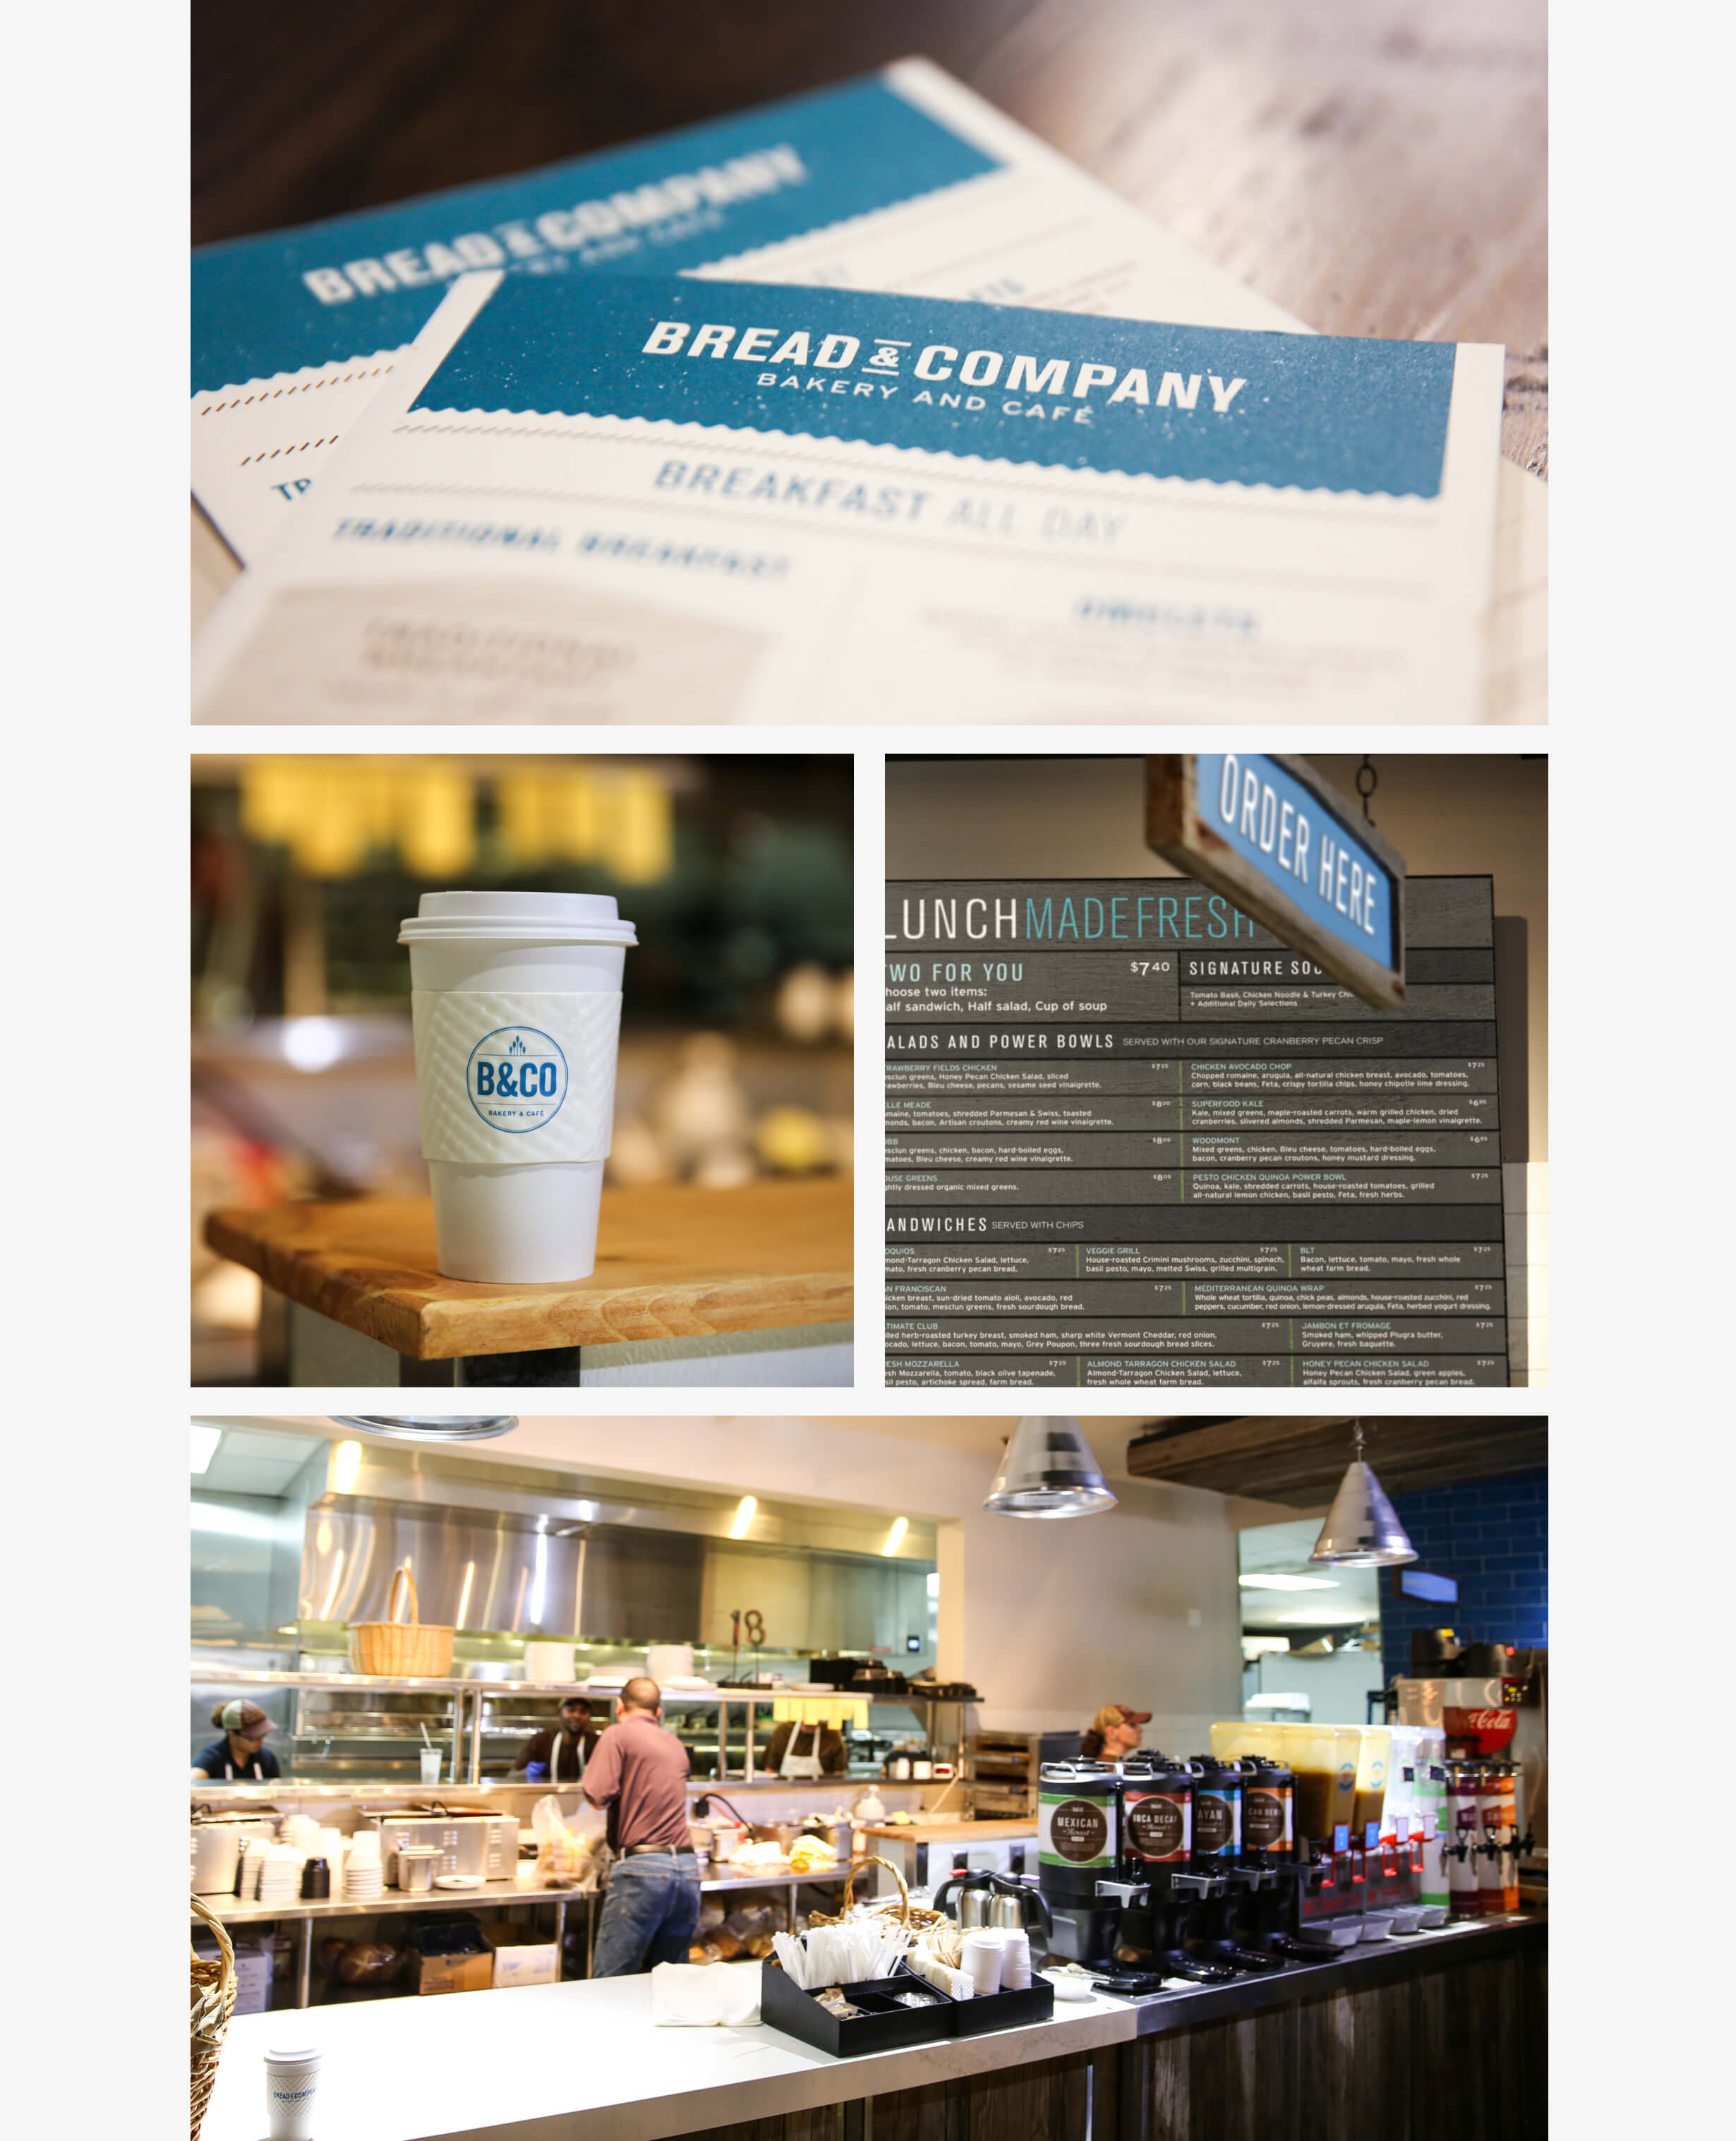 Signage, coffee cup, bubblers and menu design for Bread & Company.